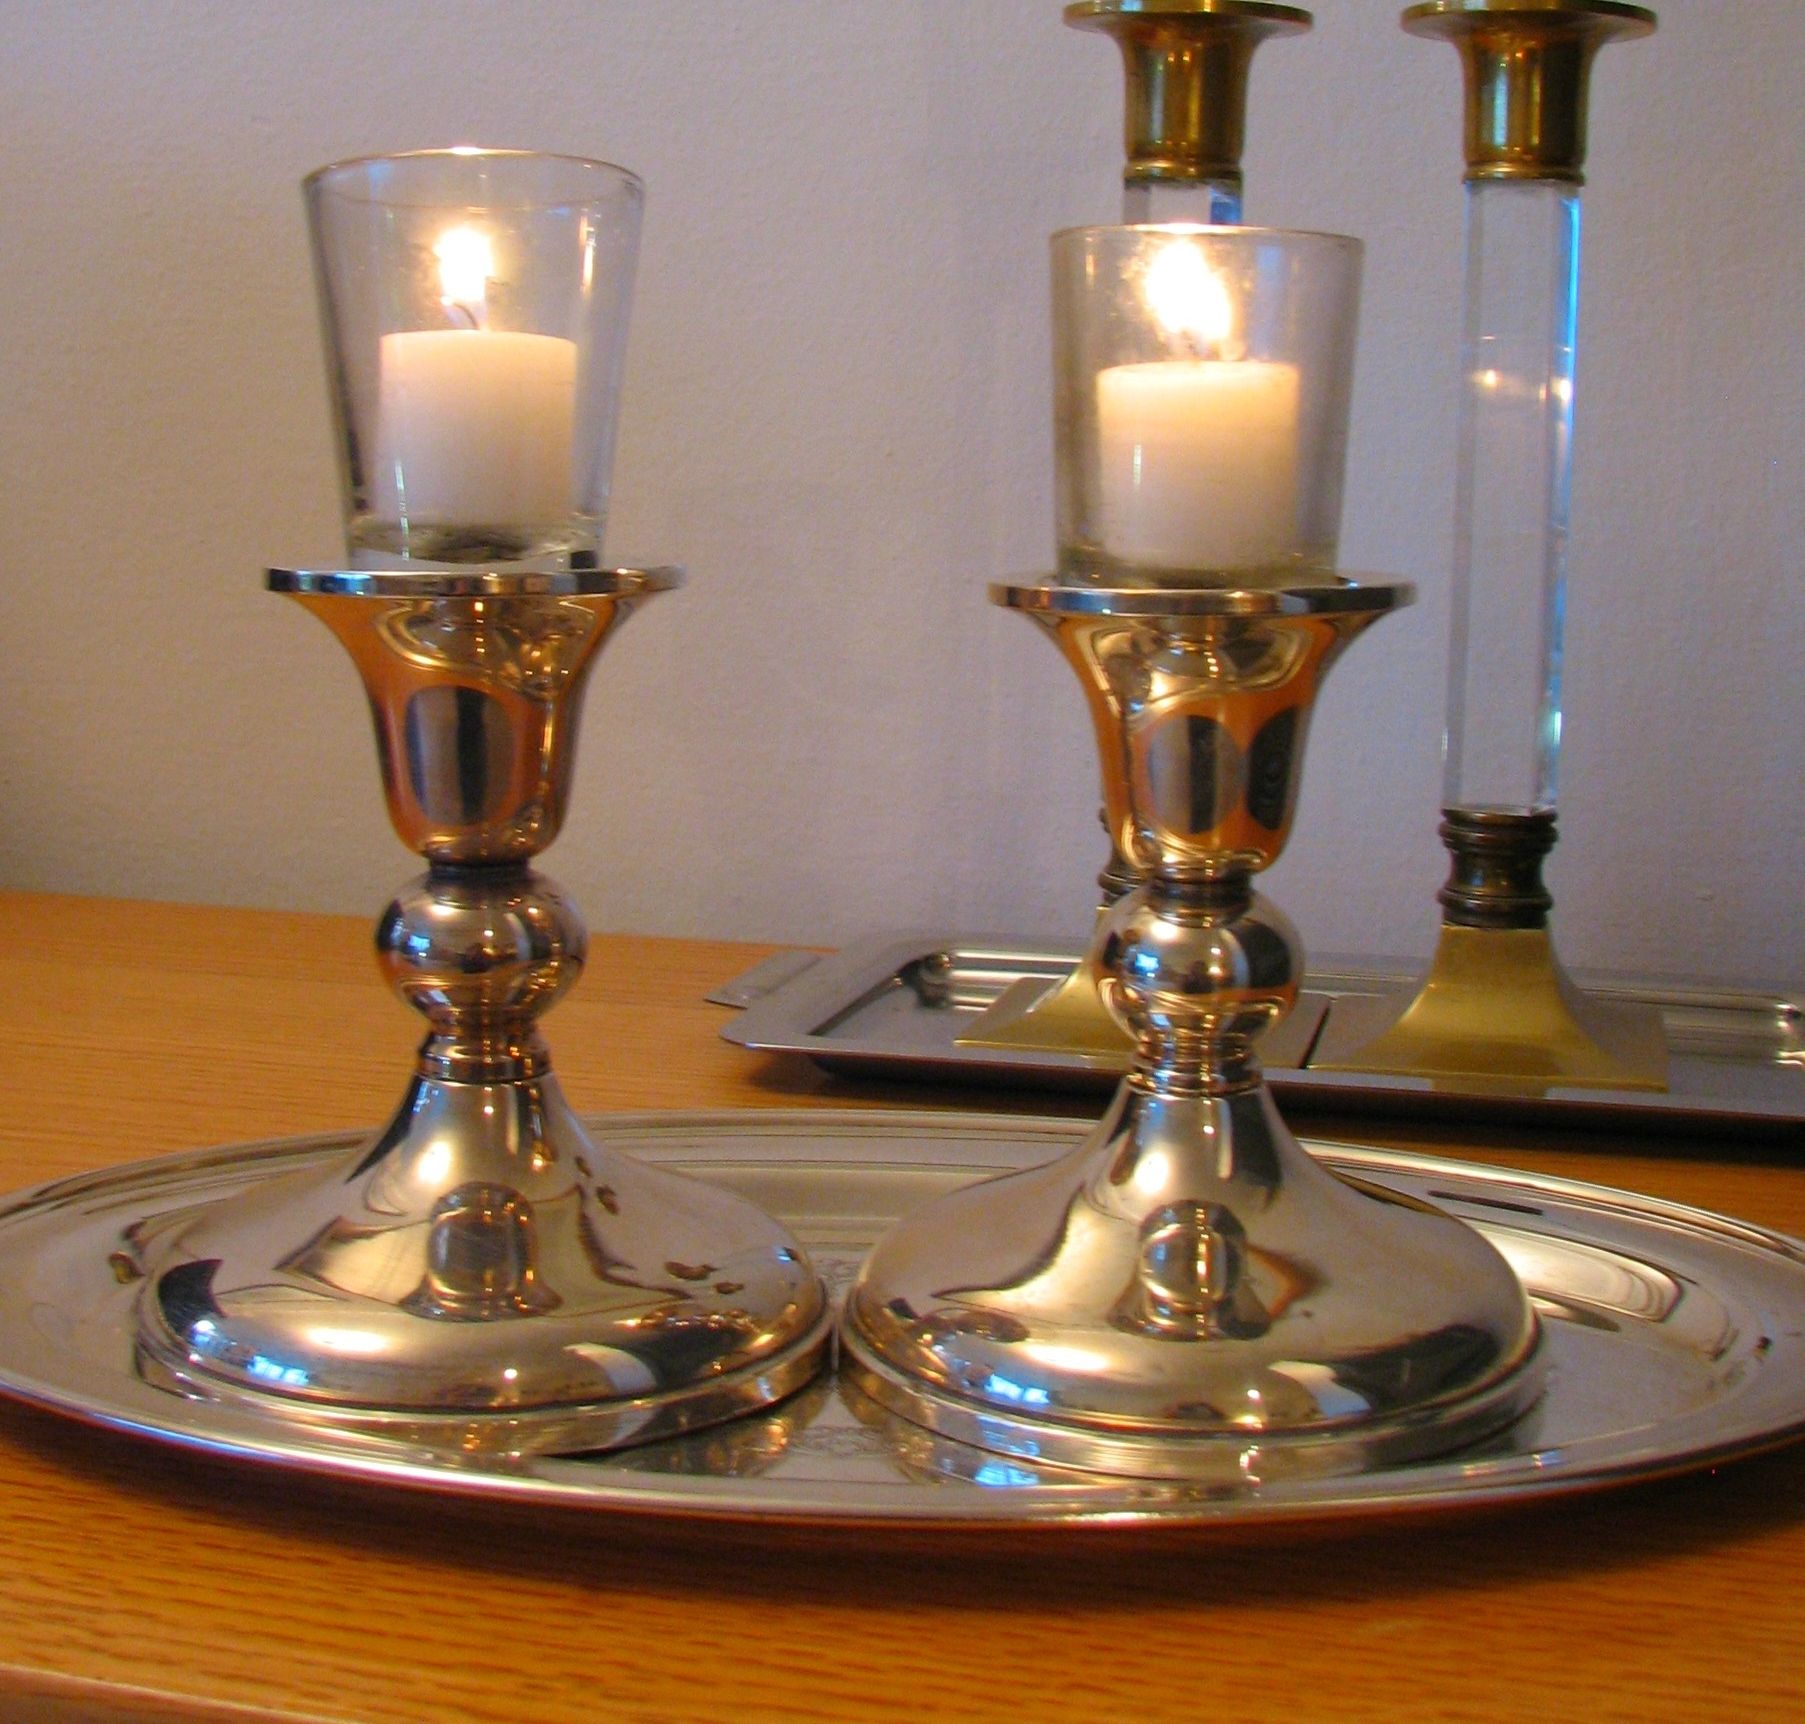 shabbos candles